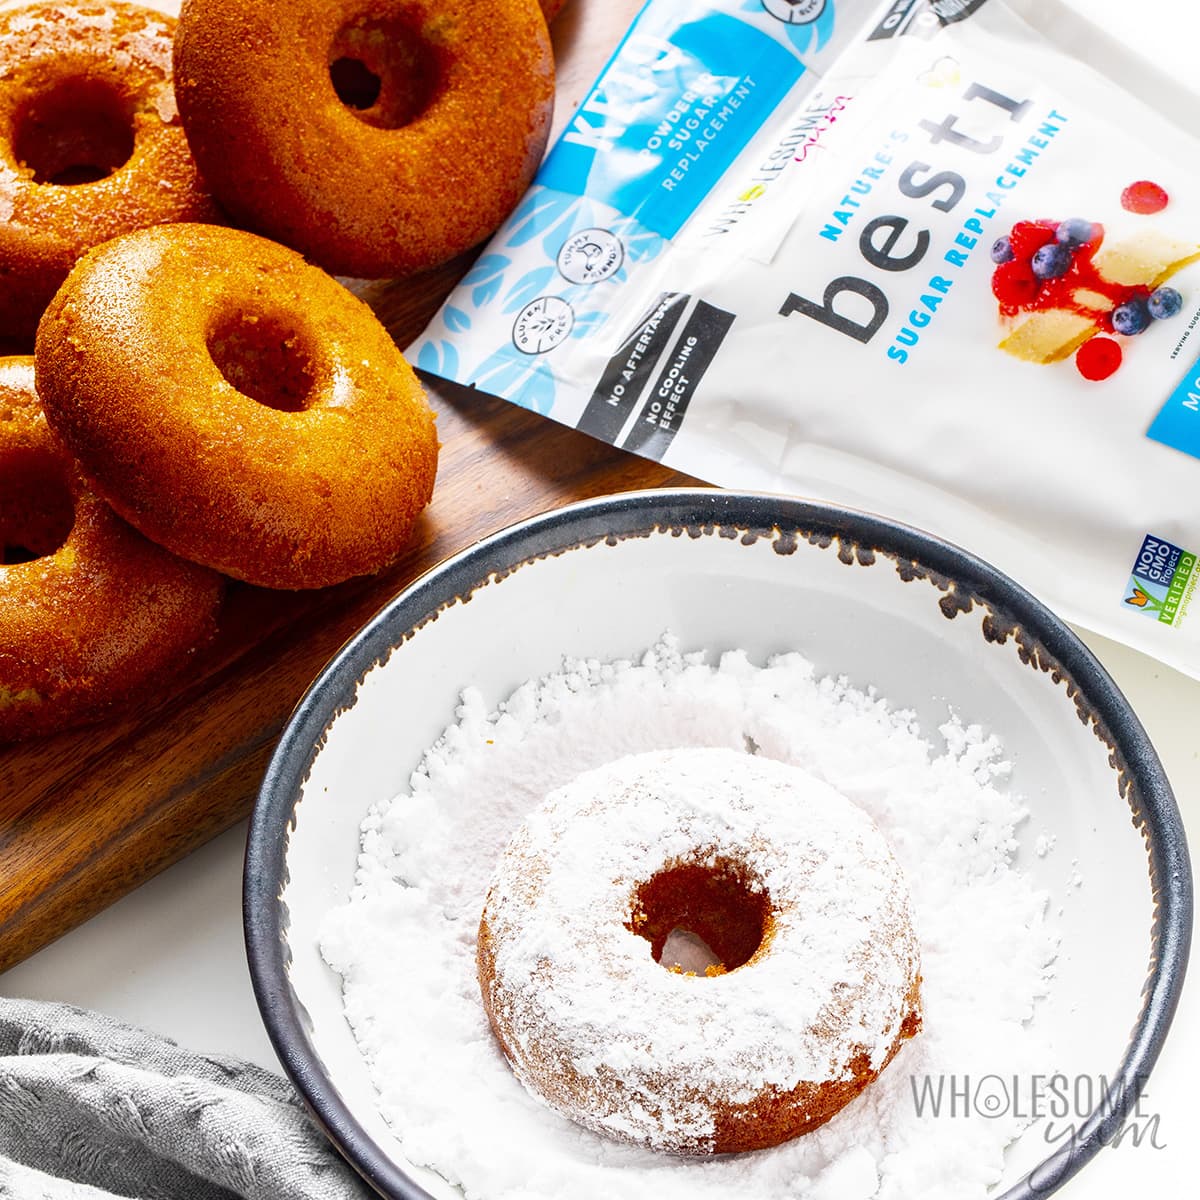 Keto donuts being dipped in powdered Besti.